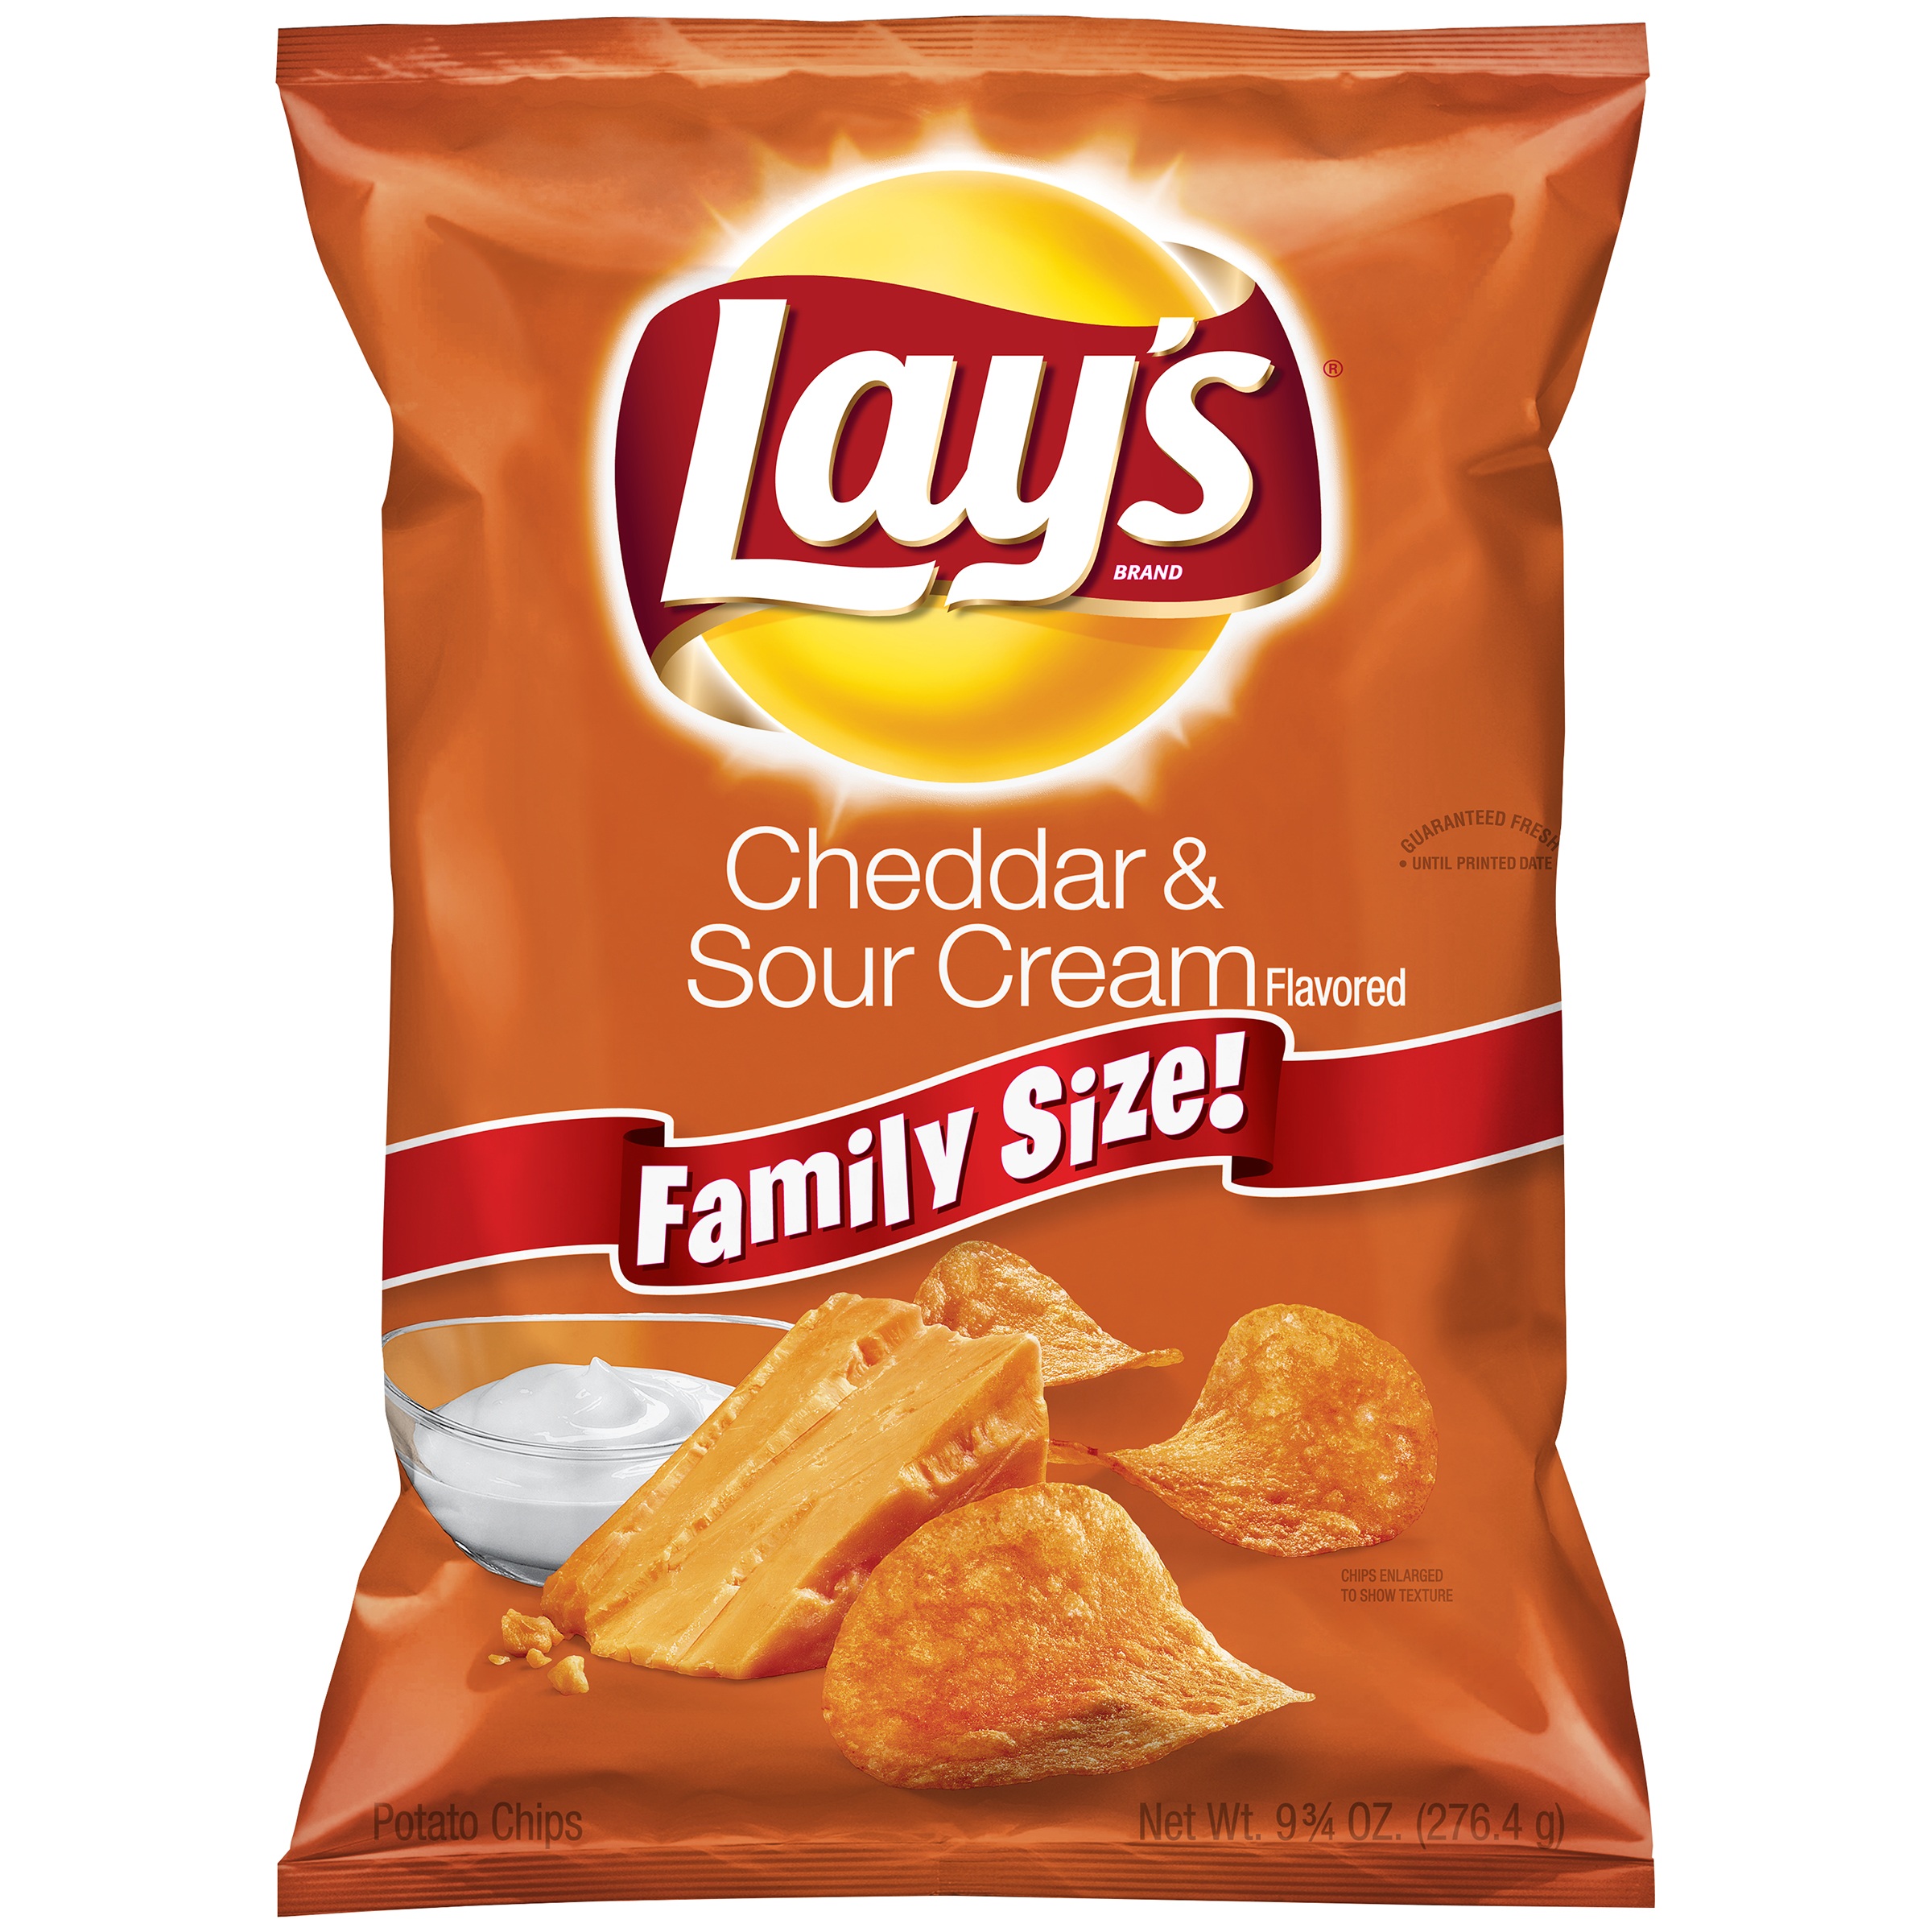 Lay's Cheddar & Sour Cream Flavored Potato Chips